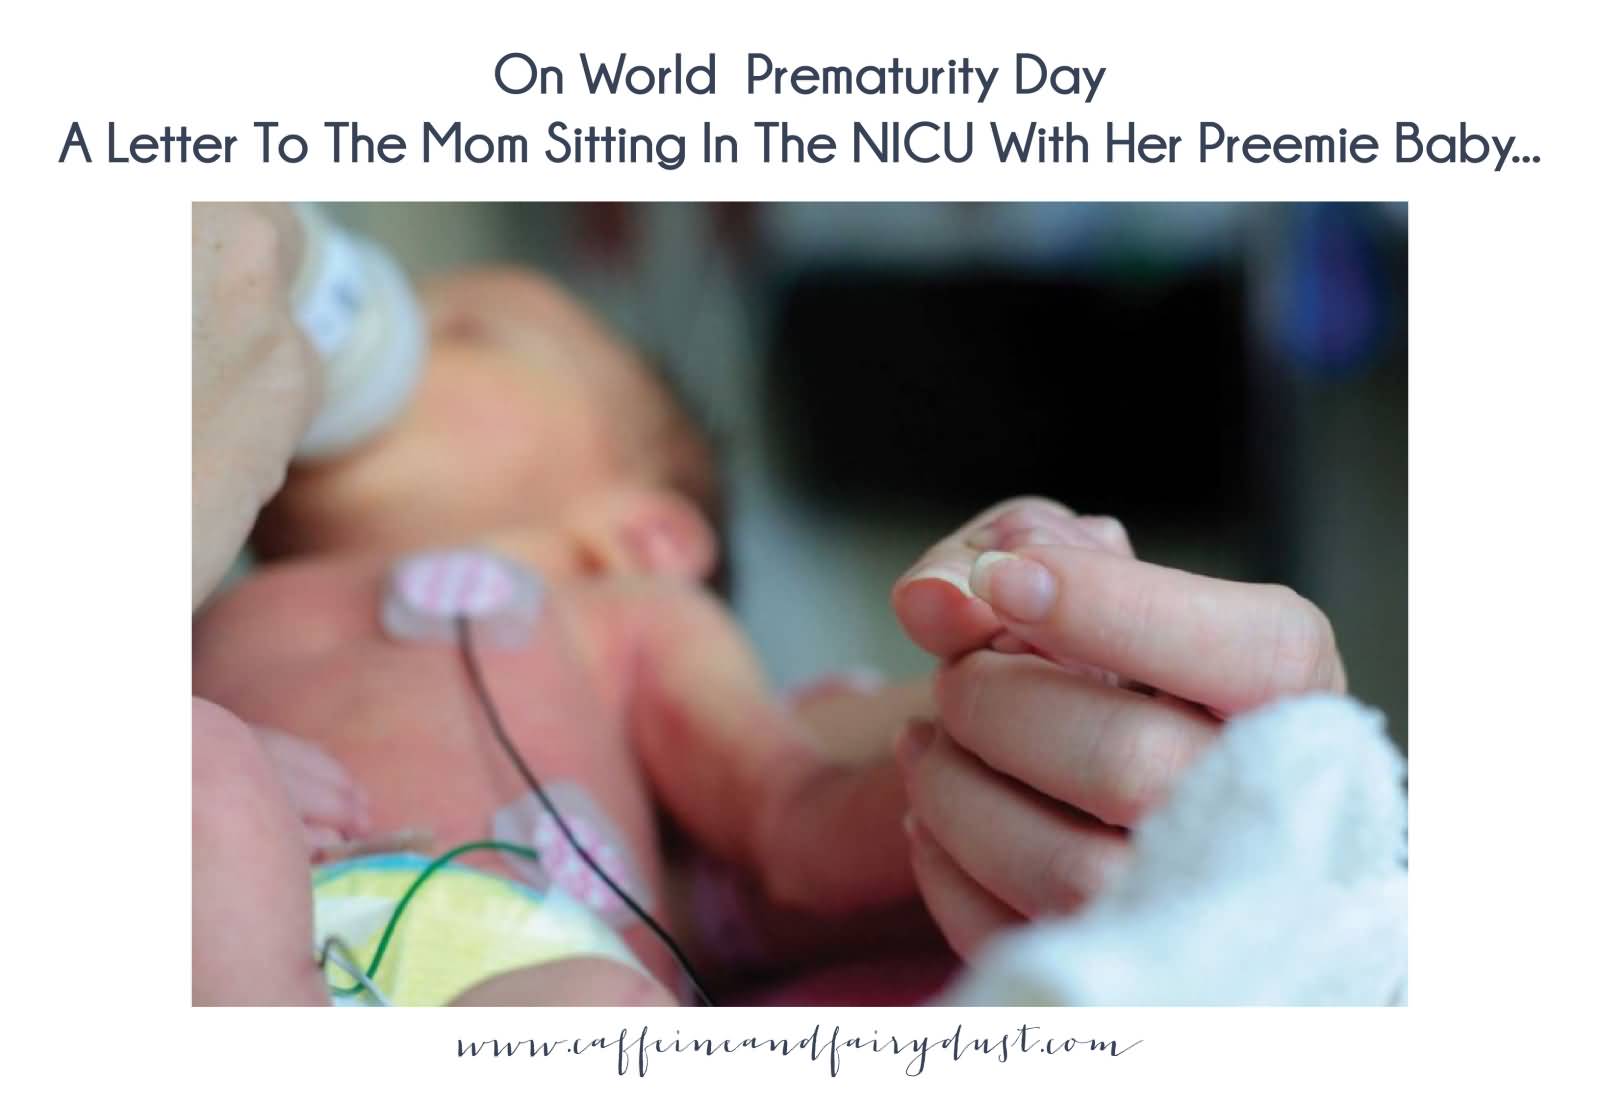 On World Prematurity Day A letter to the mom sitting in the NICU with her preemie baby